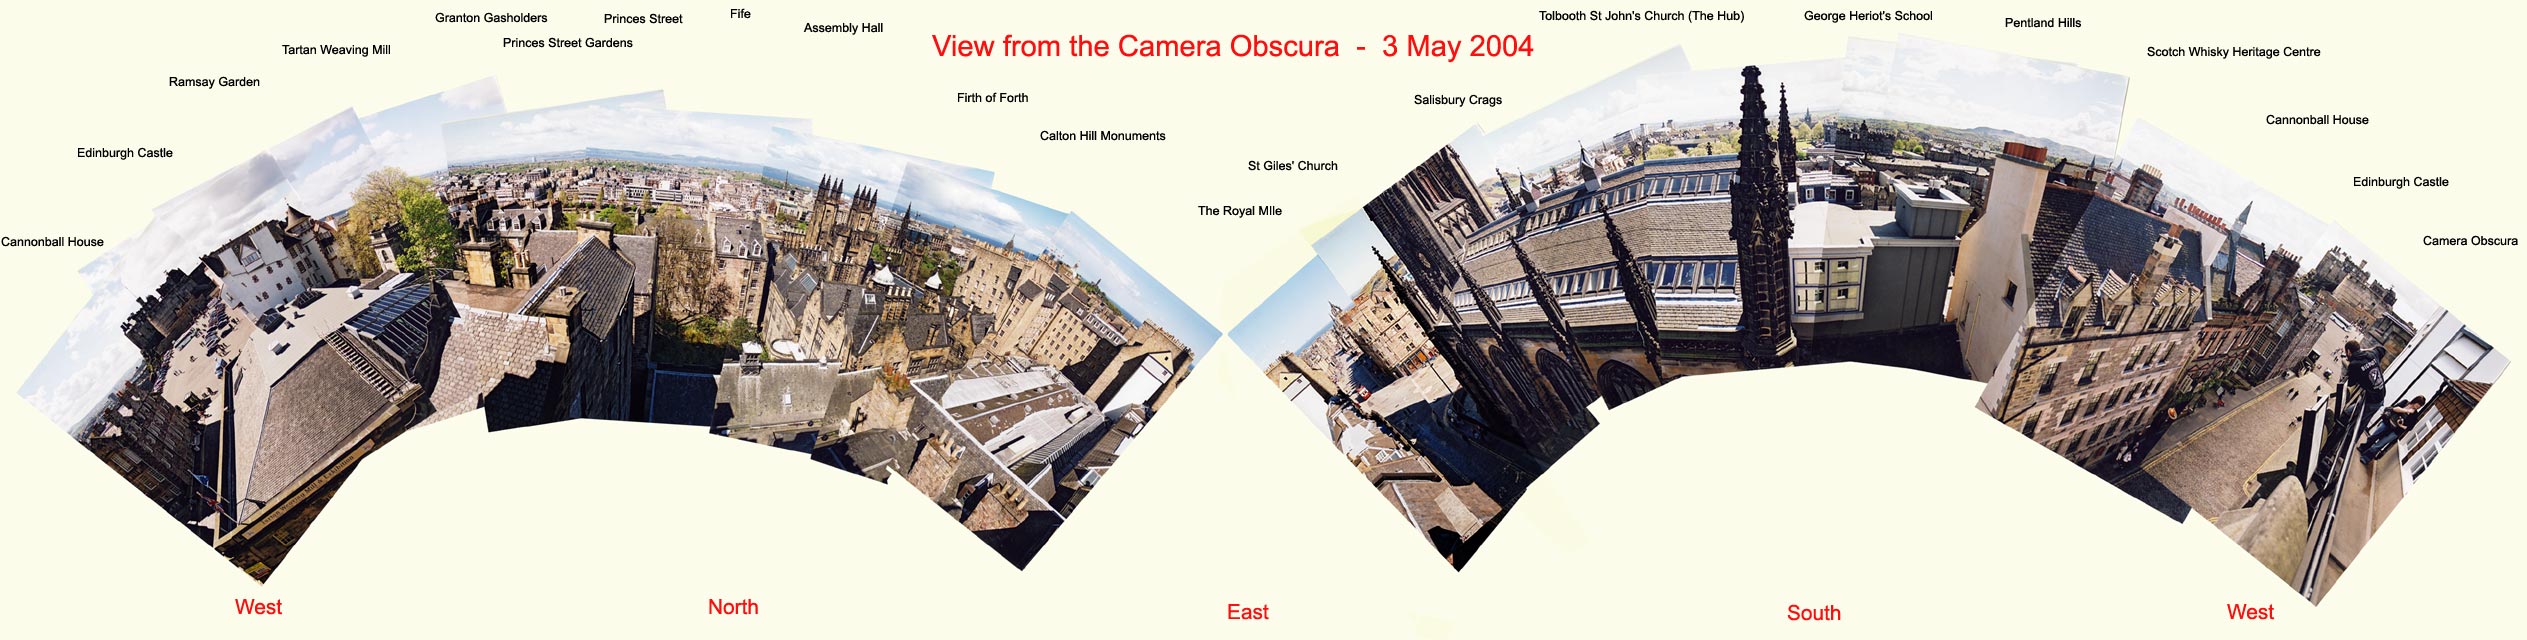 Panoramic View of Edinburgh from the Camera Obscura